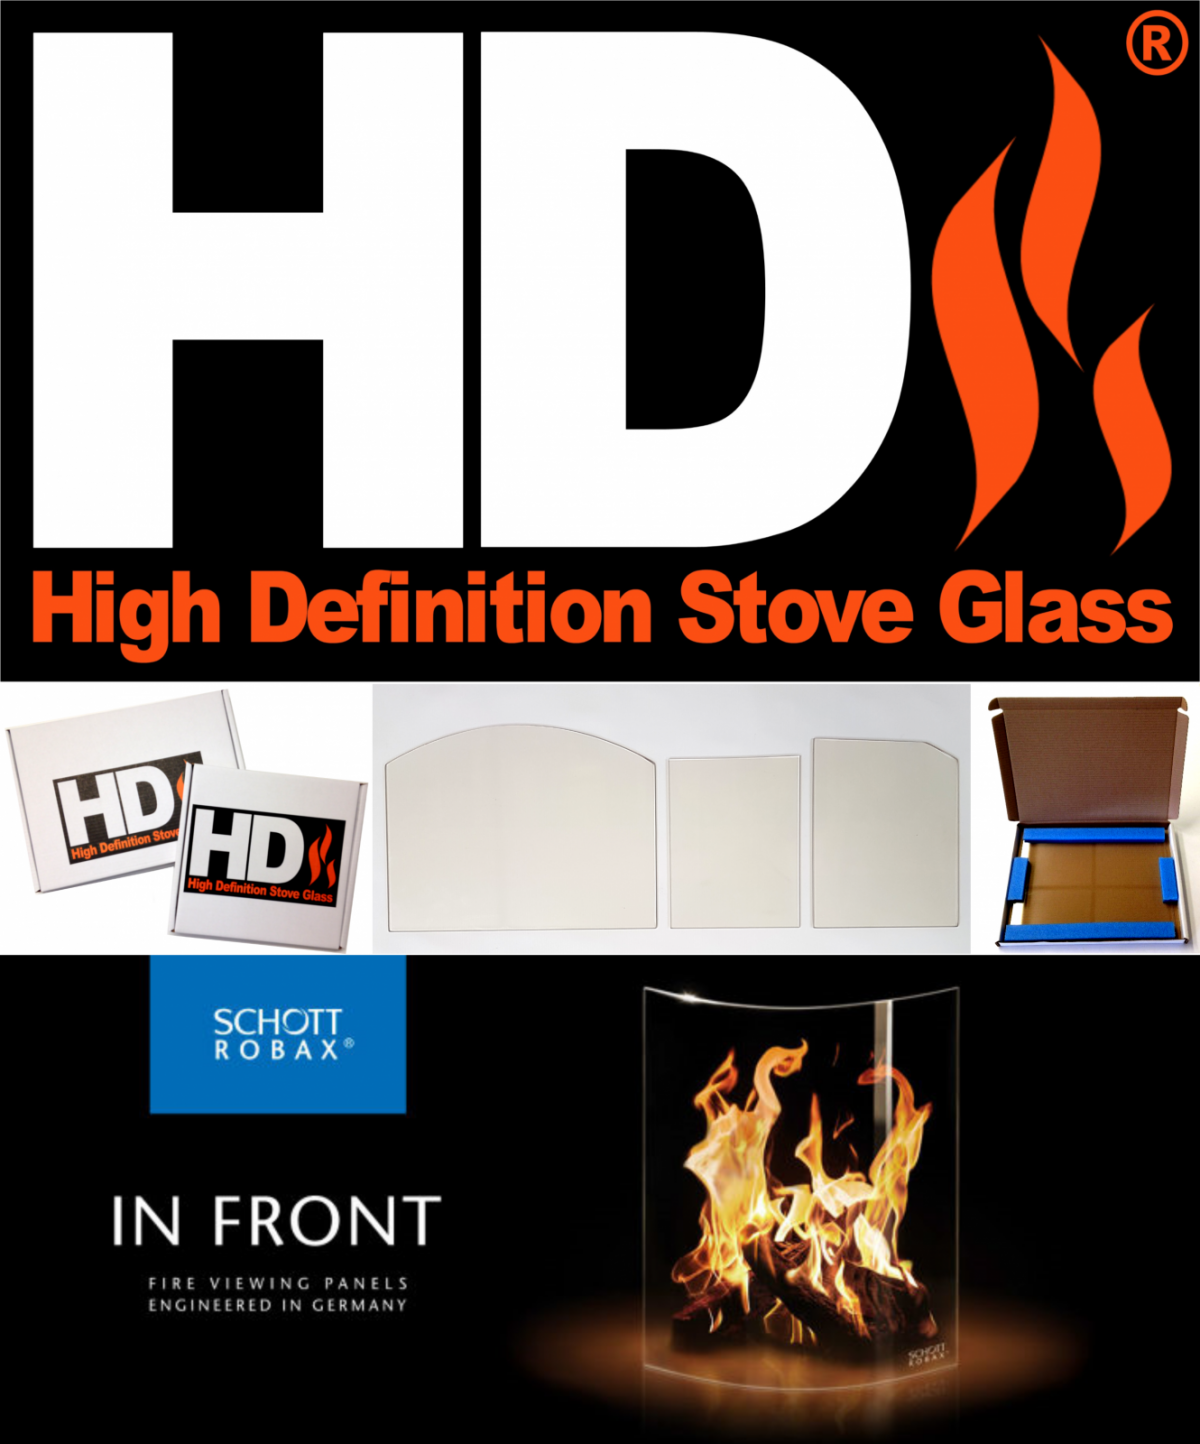 High Definition Stove Glass for the Evergreen ST 205